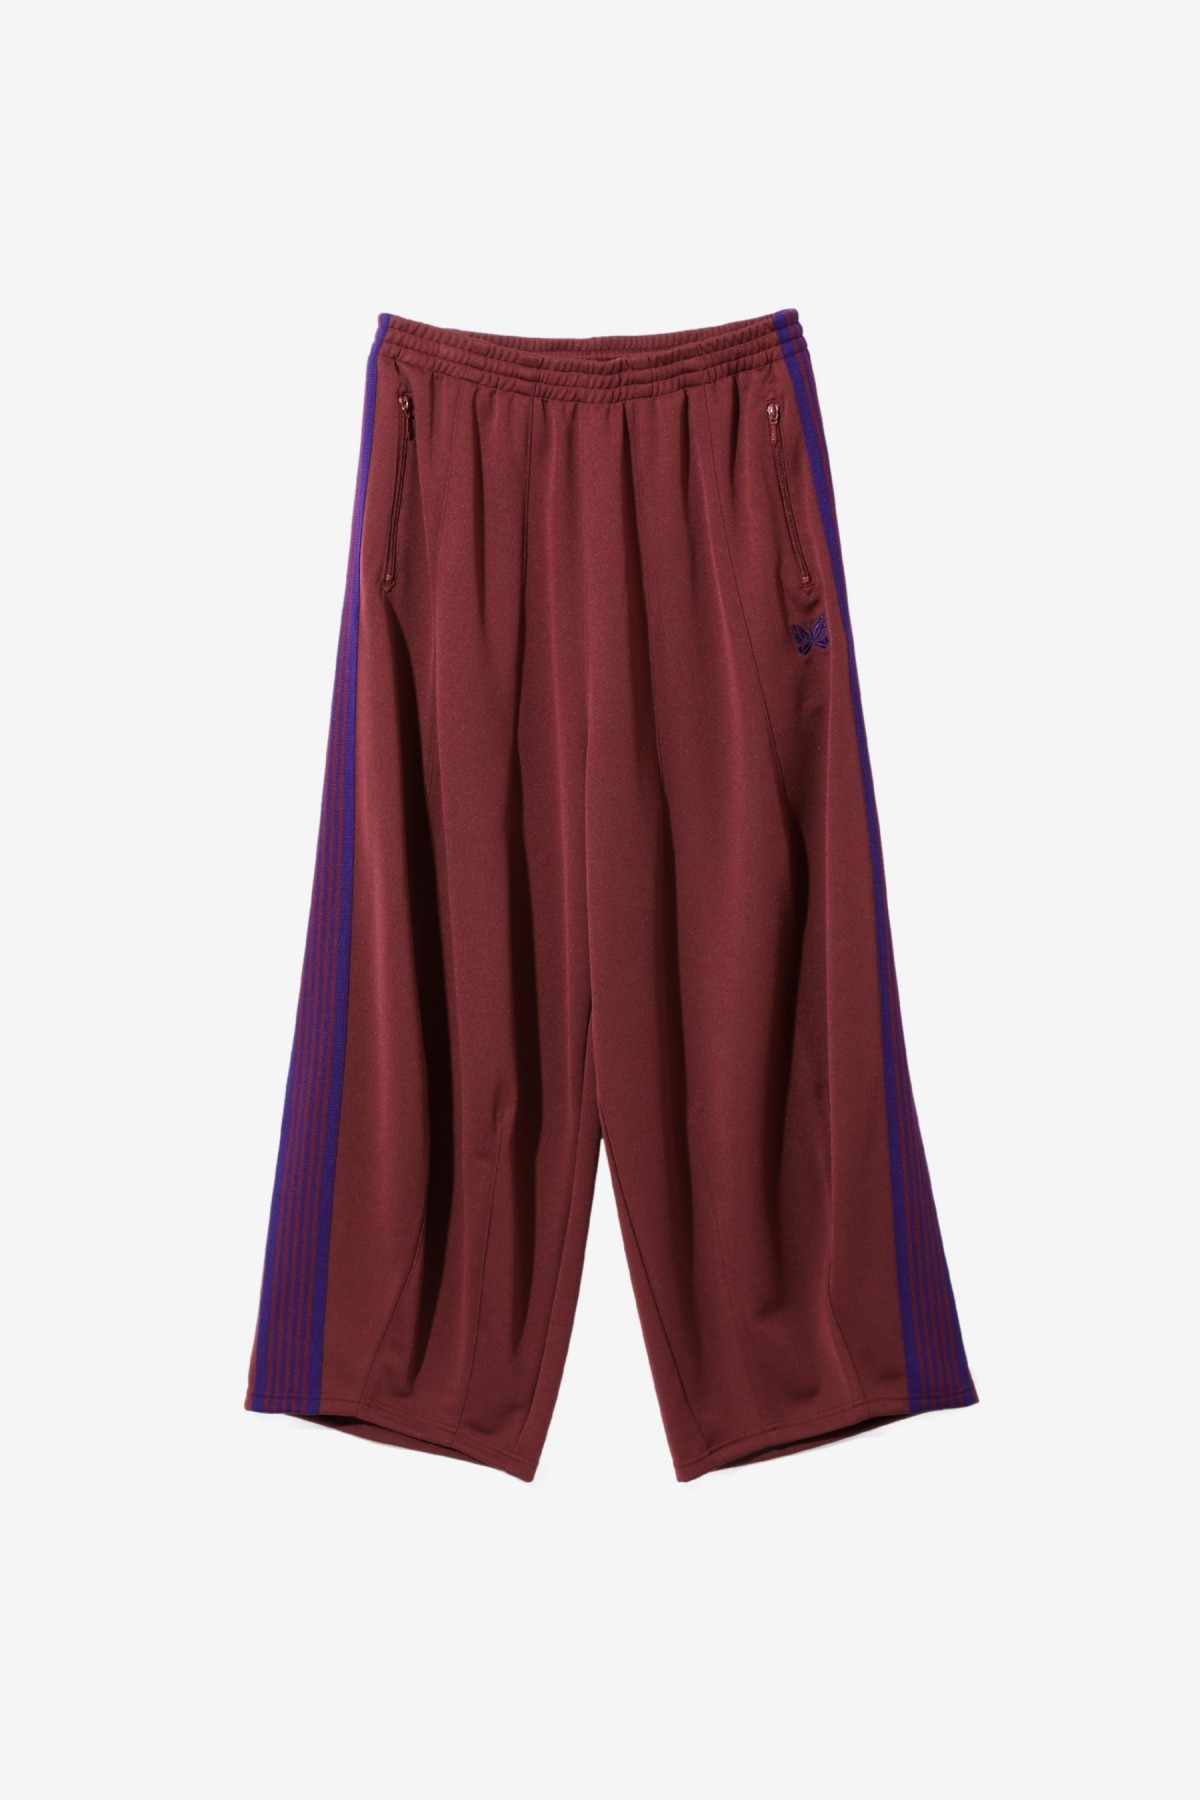 Needles Needles H.D. Track Pant in Wine